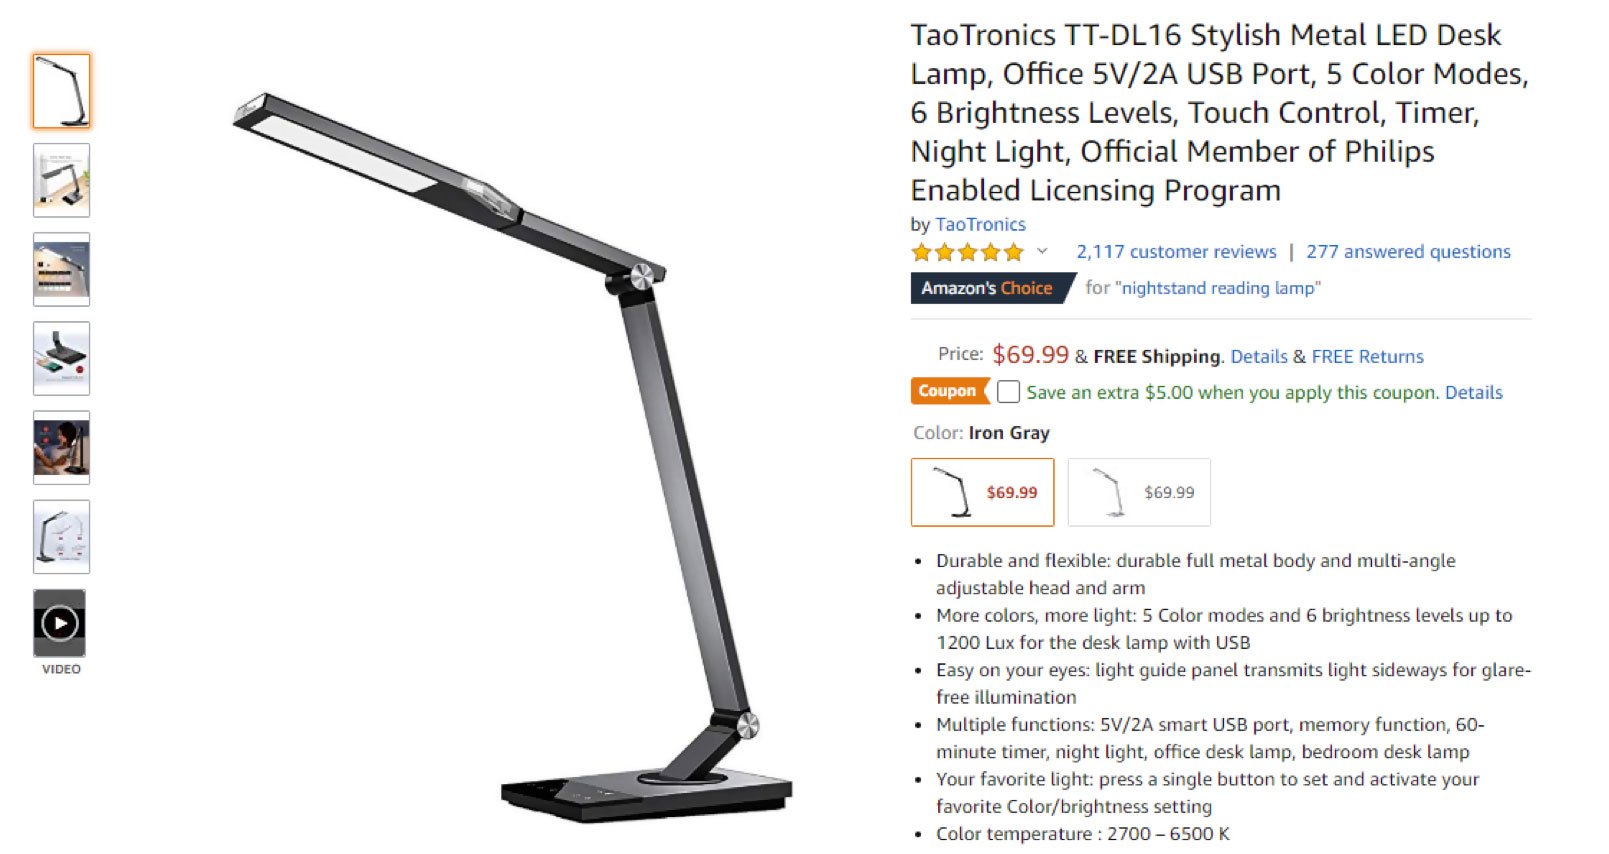 lamp sourced from Amazon